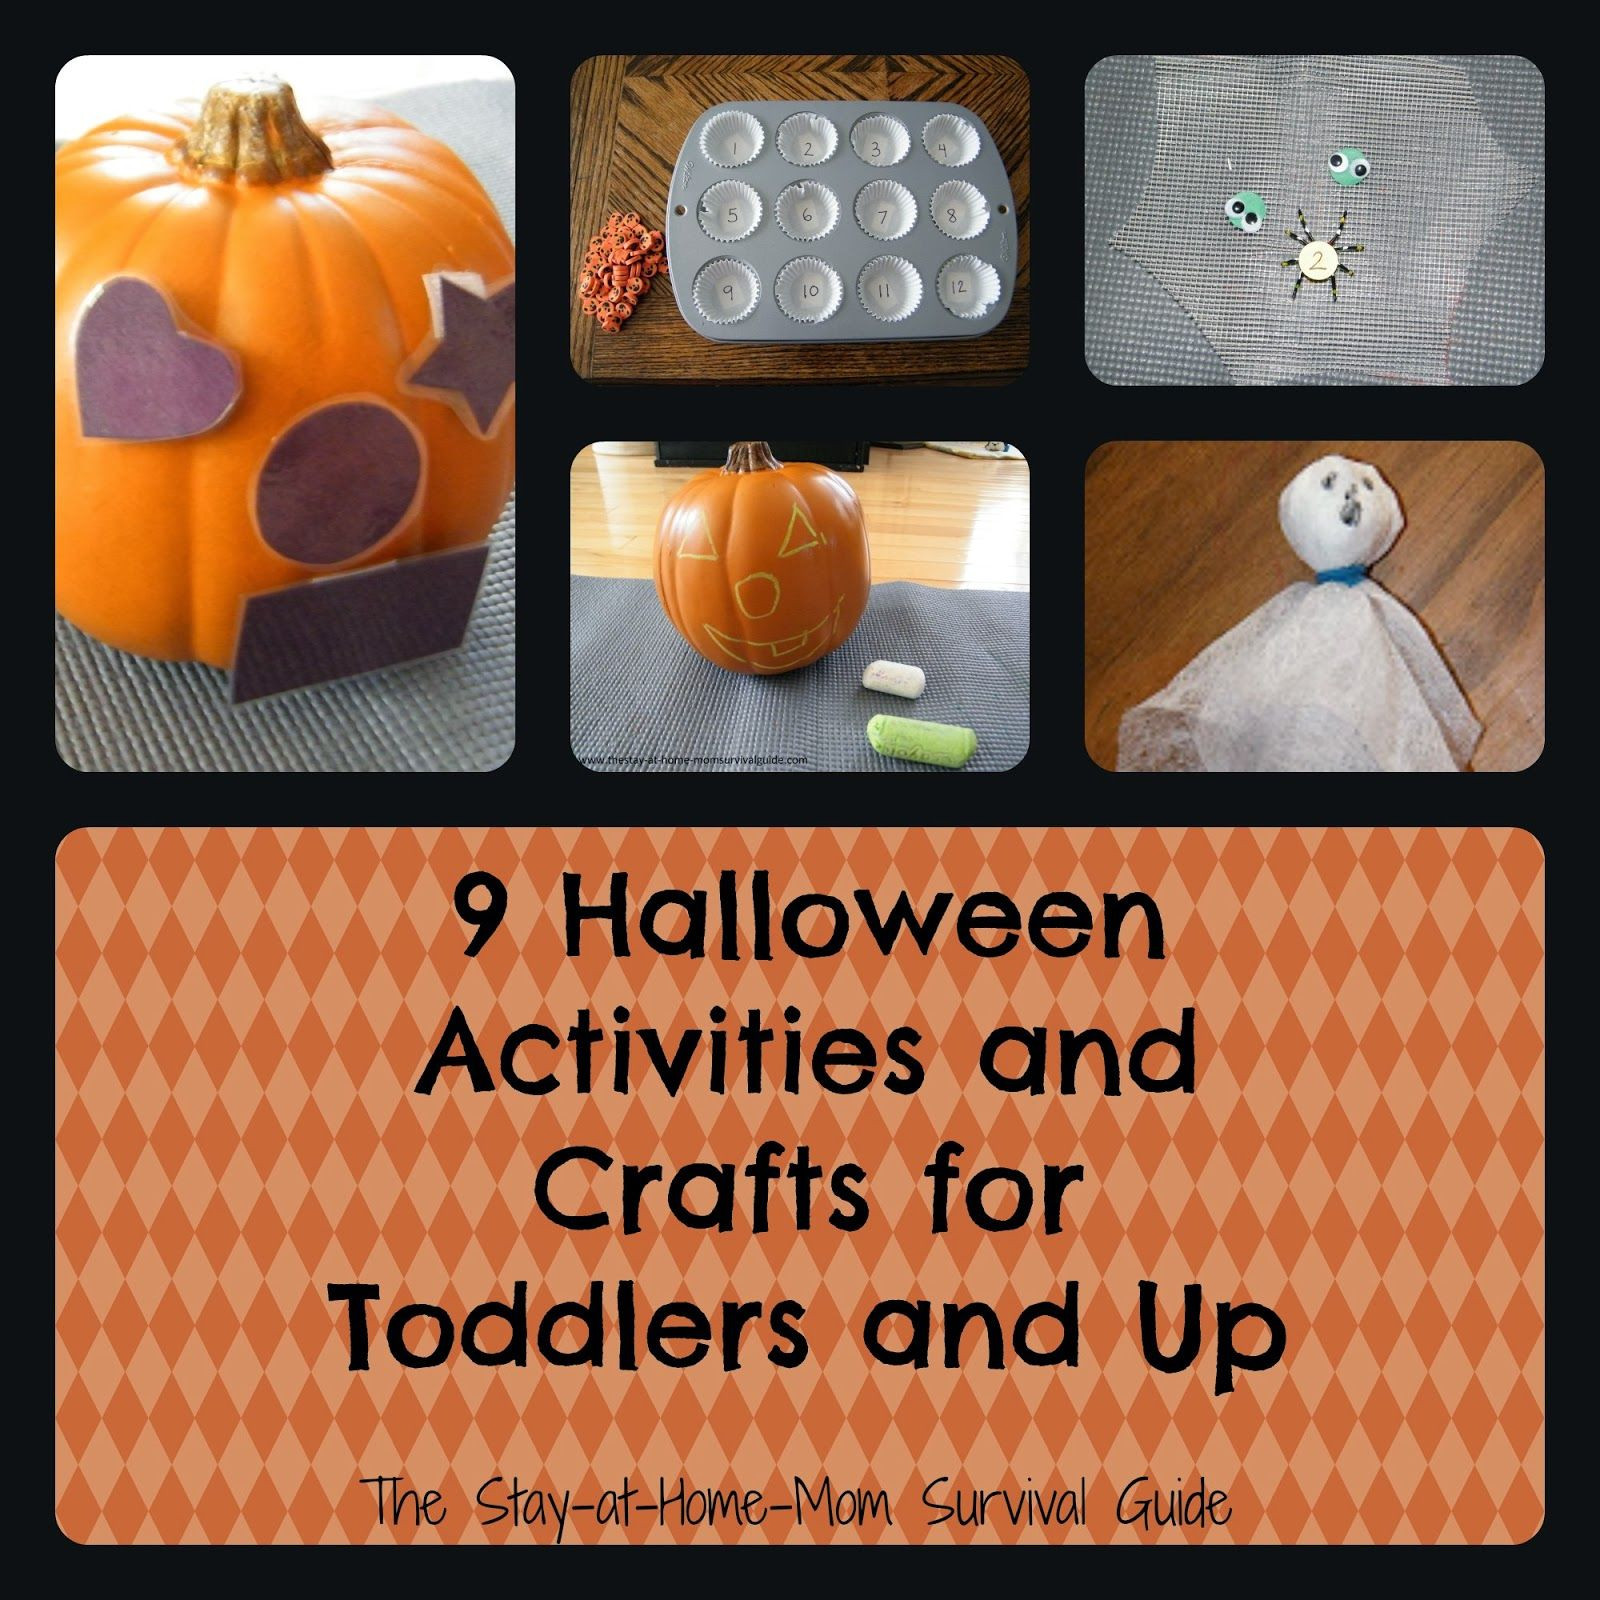 Halloween Crafts For Toddlers Age 3
 9 Halloween Activities and Crafts for Toddlers and Up